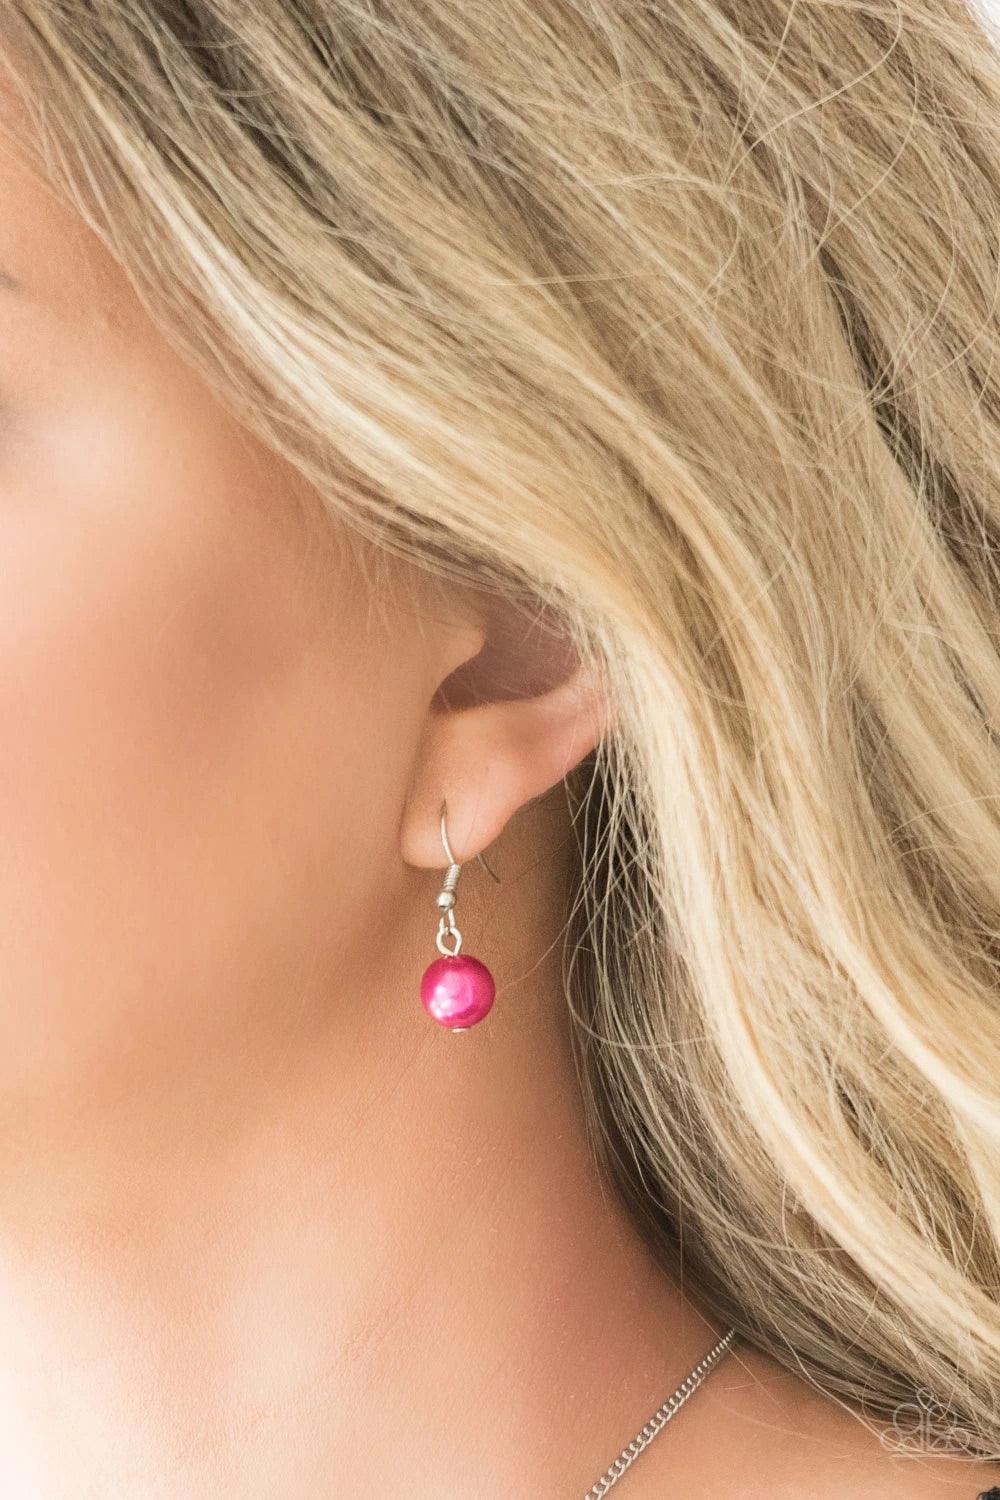 Paparazzi Accessories Belle Of The BALLROOM - Pink A dramatic pearly Granita bead swings from the bottom of an elegantly elongated silver chain. Featuring a hammered fitting, a silver tassel streams from the bottom of the colorful pendant for a whimsical